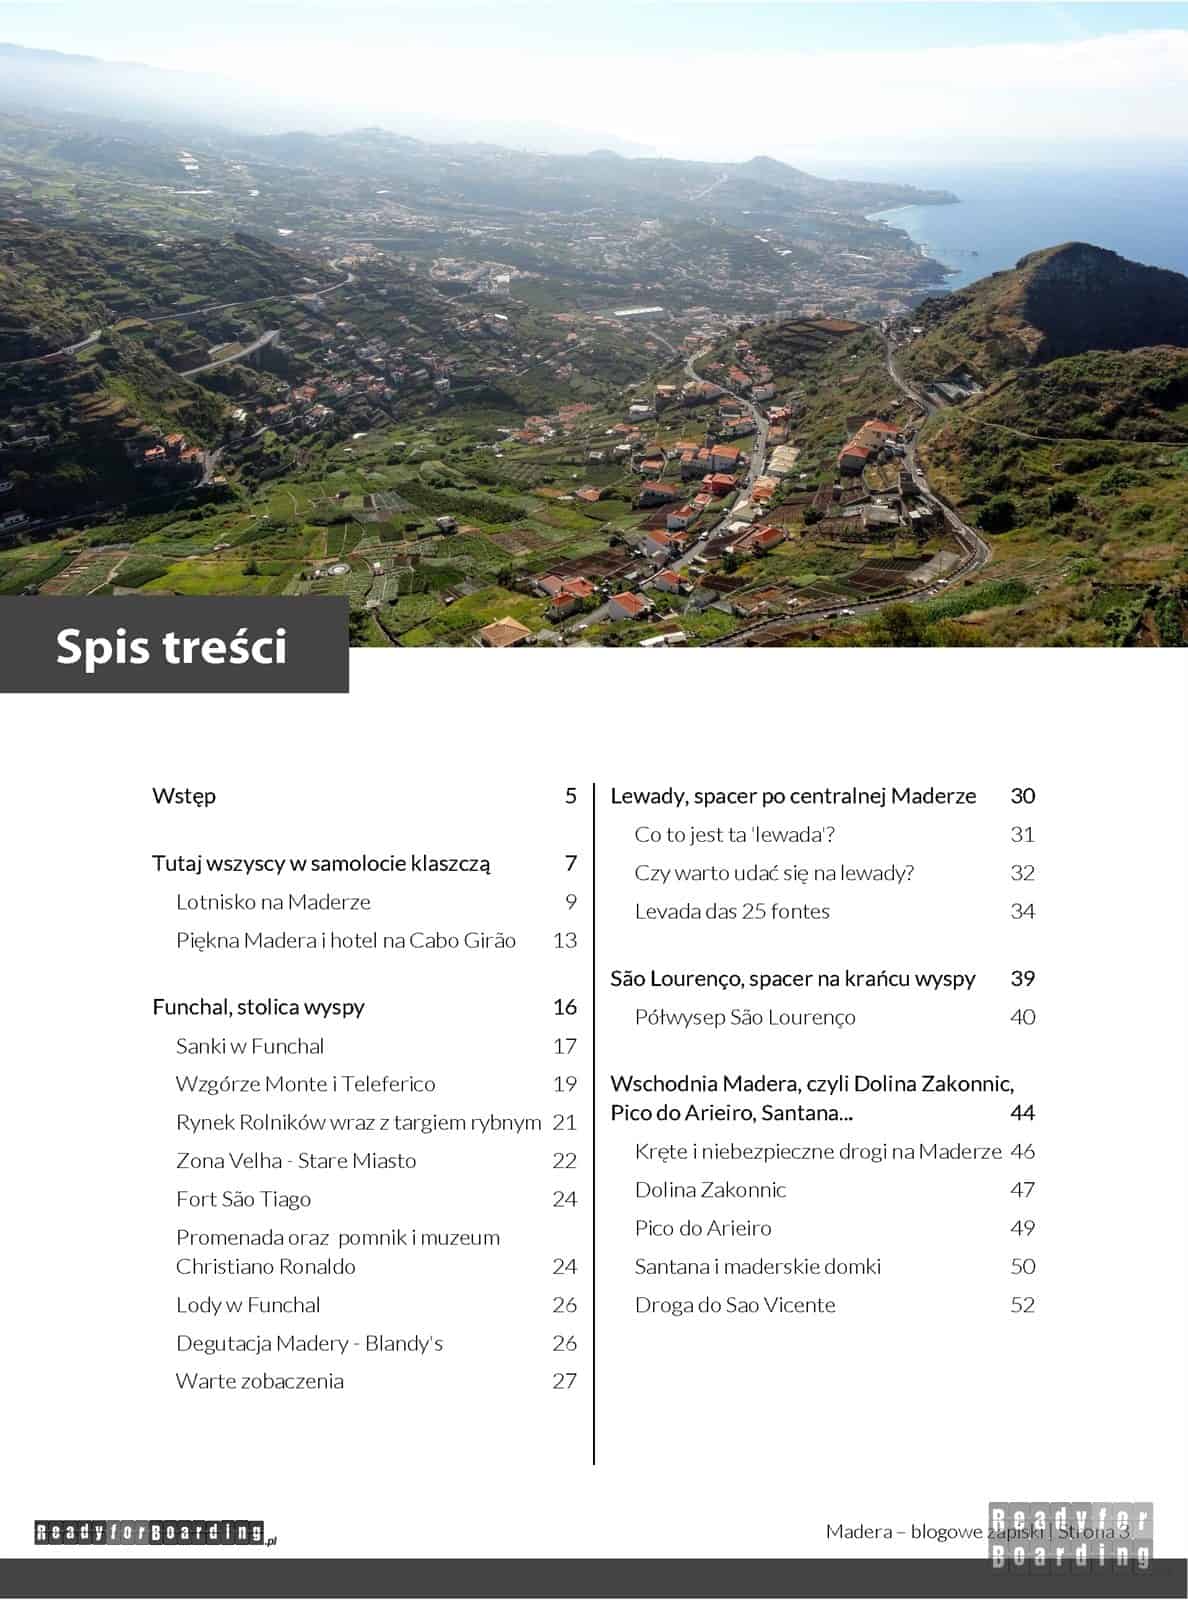 eBook: Madeira - blog notes by Ready for Boarding